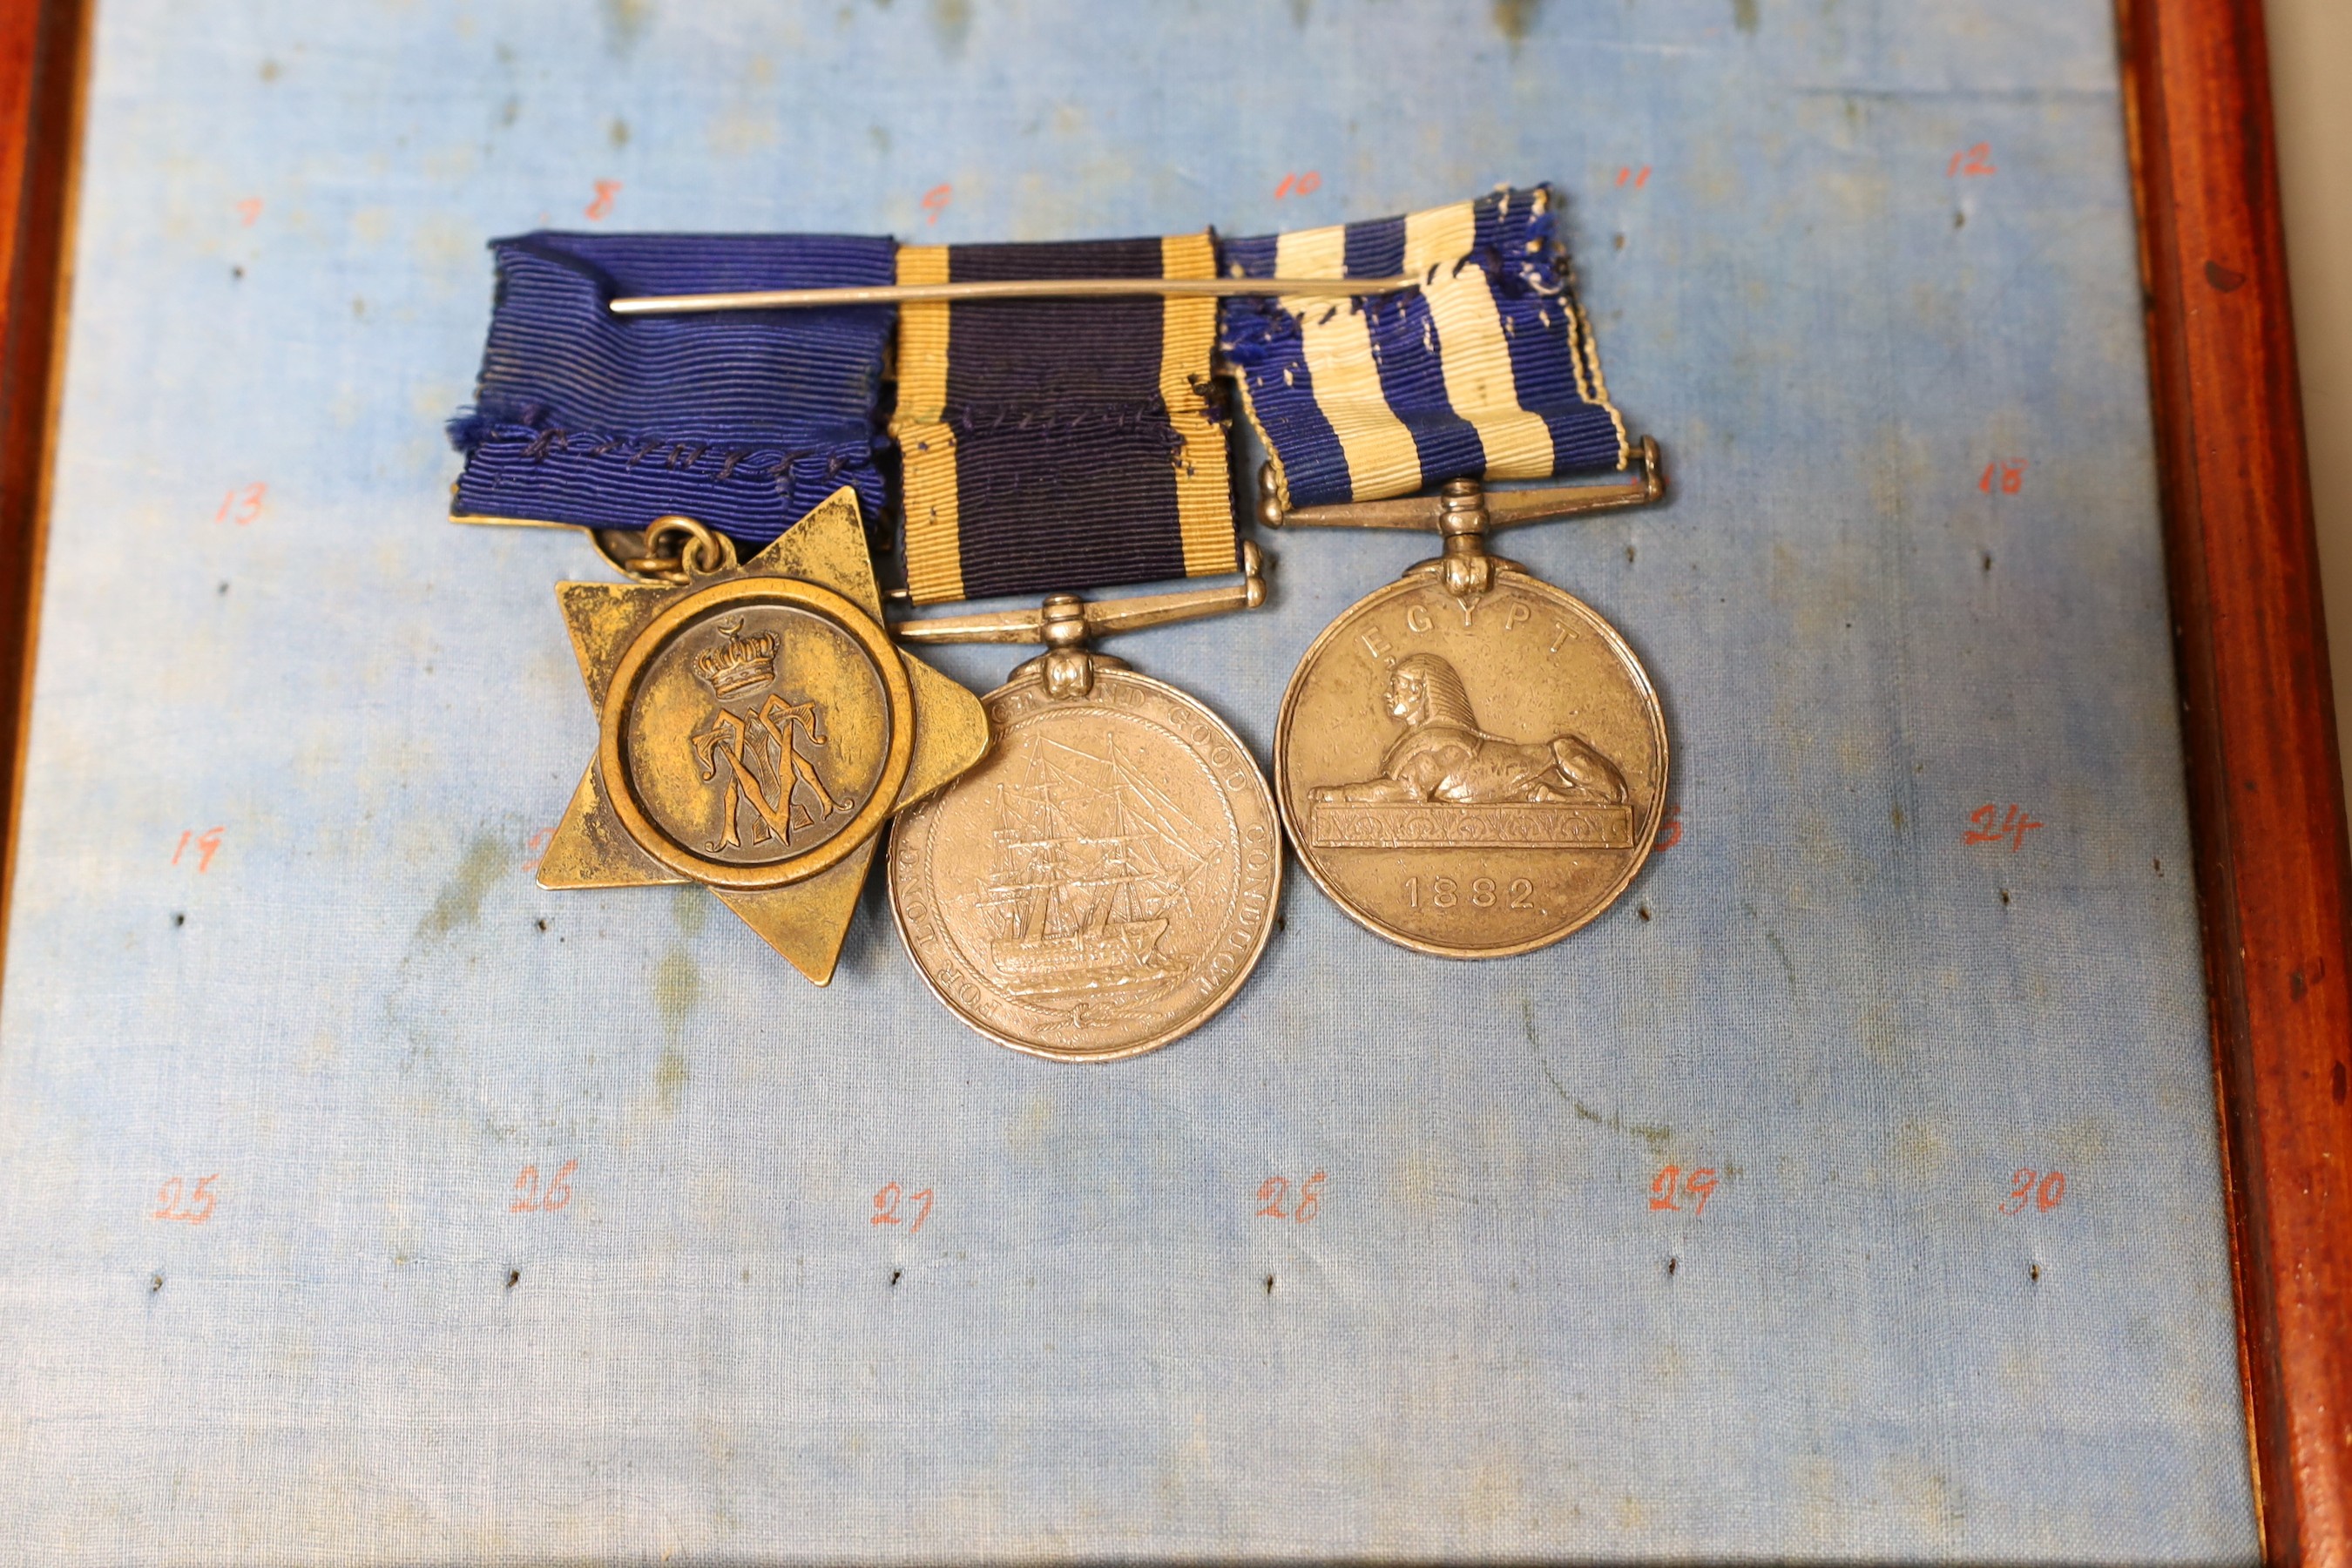 Egypt 1882 medal, Khedive star and Naval Long Service and Good Conduct medal to Wm. Barratt Sergt. - Image 2 of 2